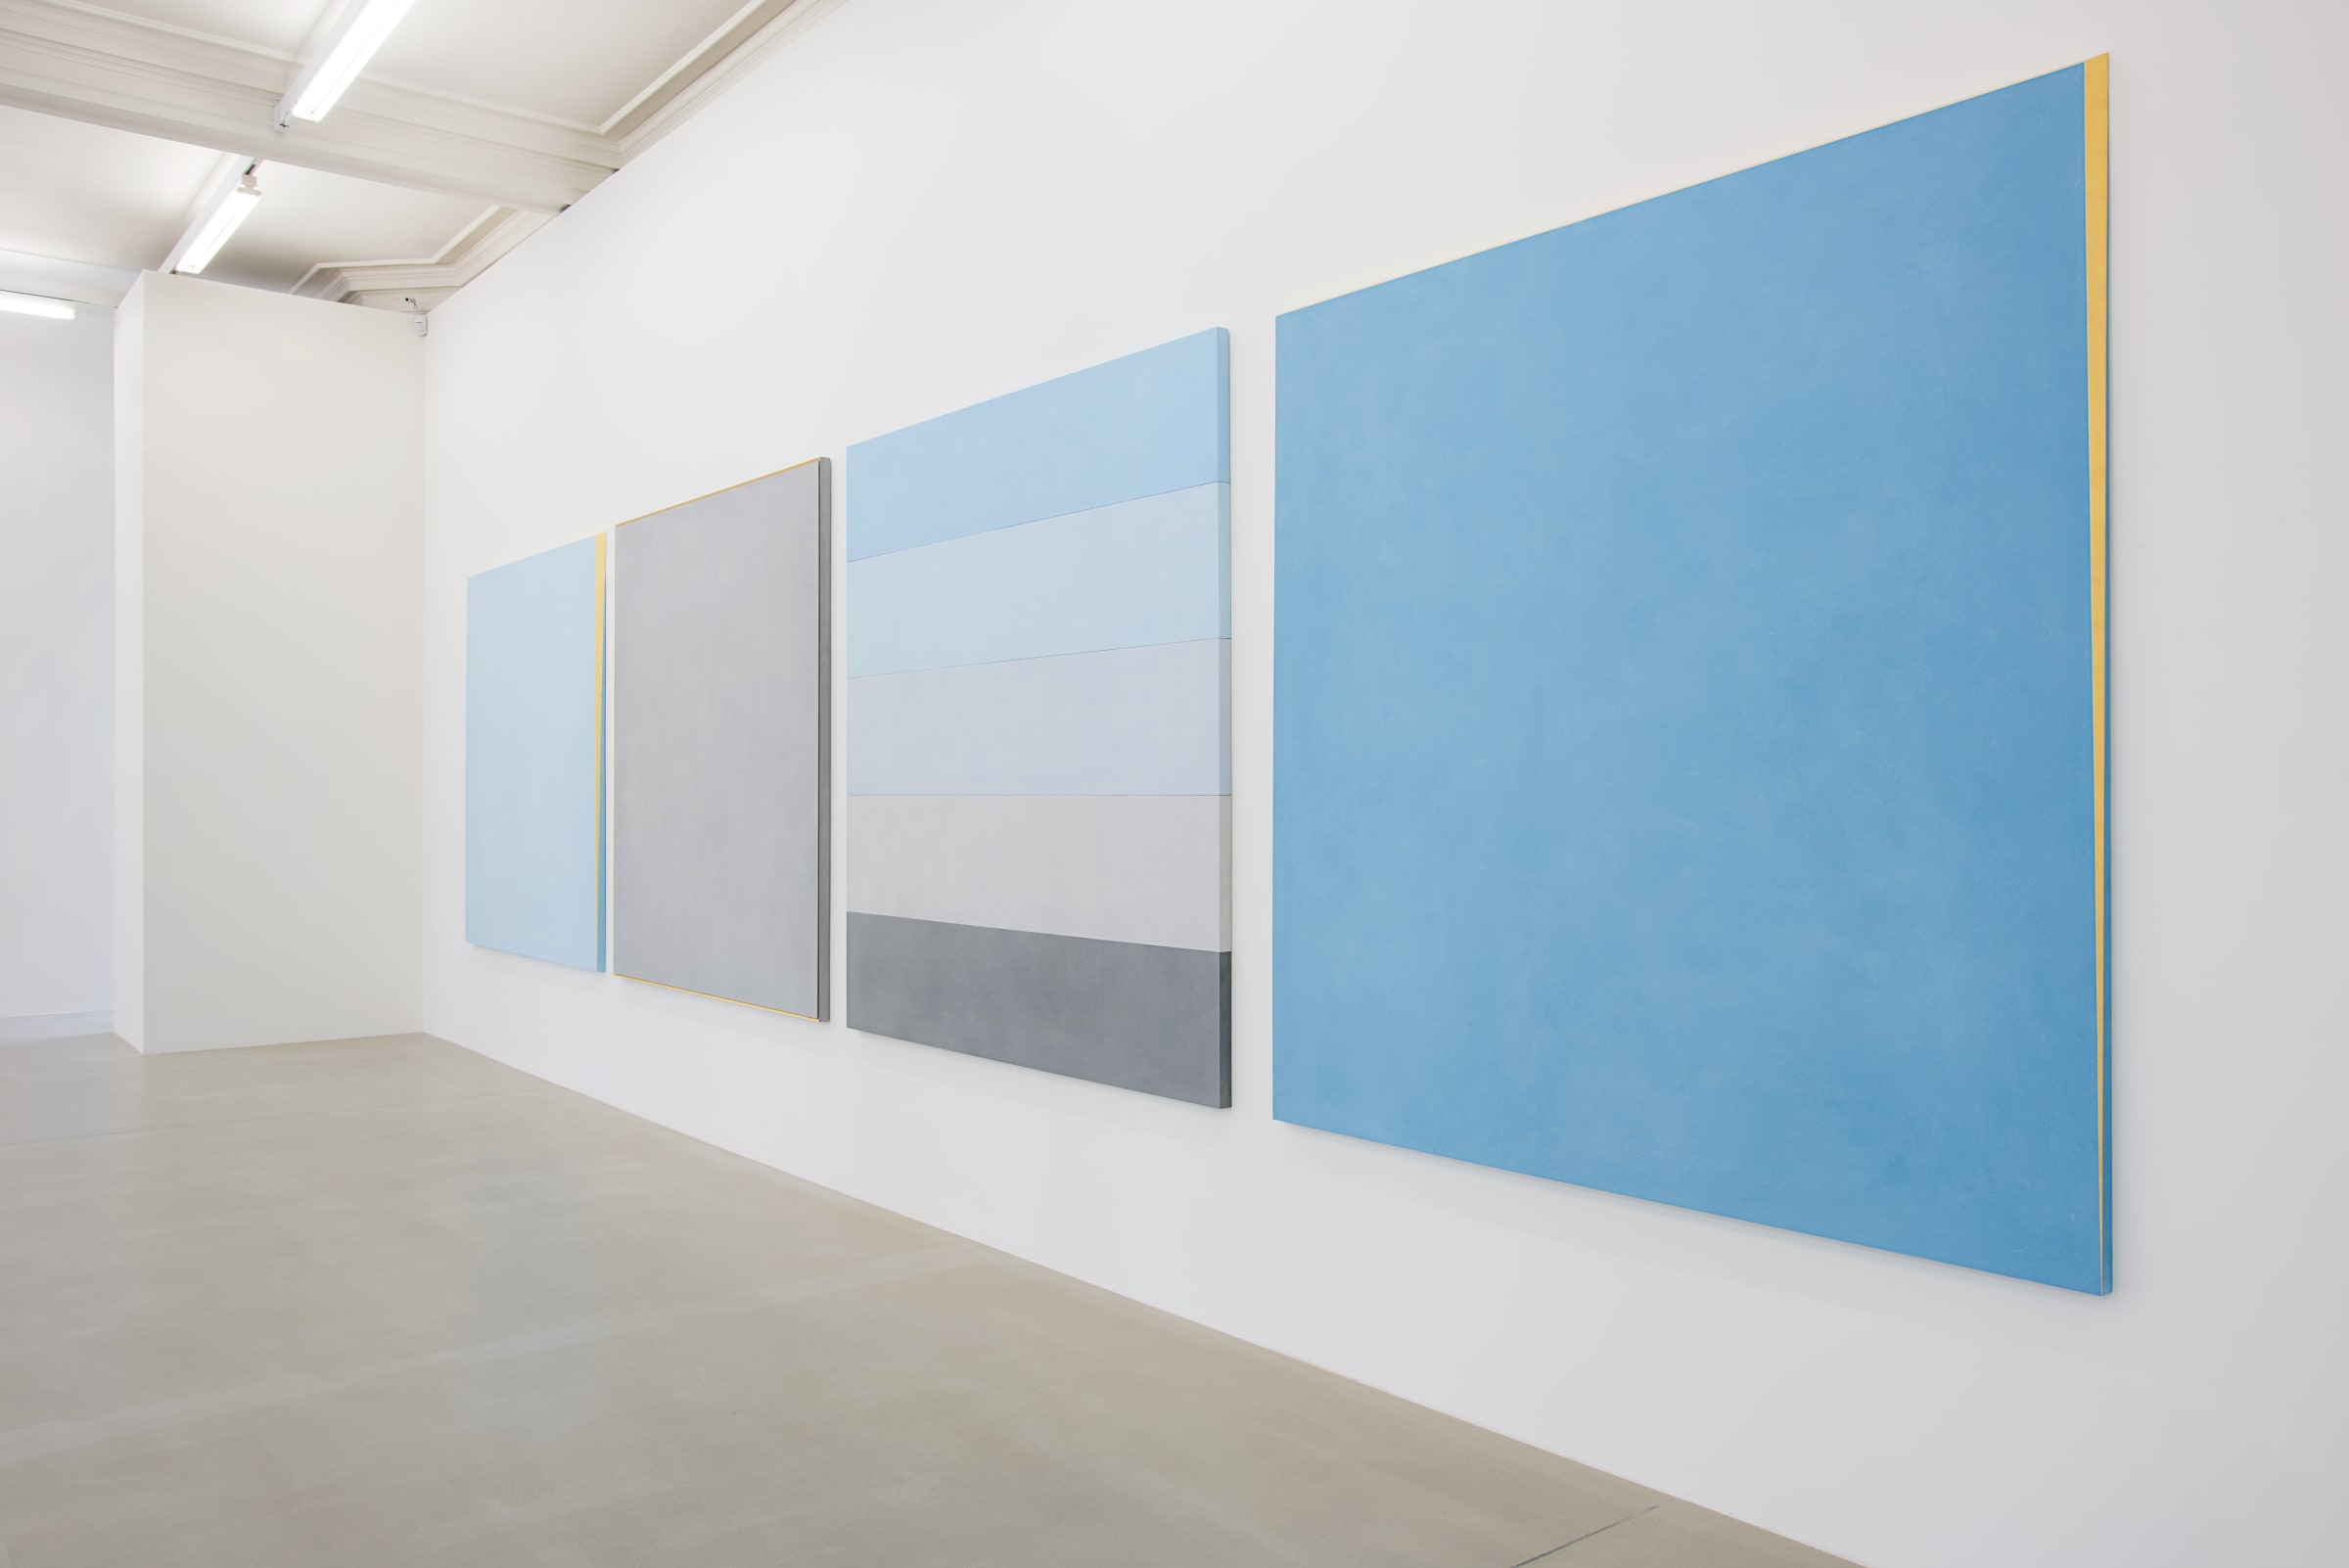 Four paintings hang on a white wall. From the left: solid light blue with gold framing, solid light gray with gold framing, 5 strips: light blue, lighter blue, light grey, grey,  darker grey, and finally, sky blue with gold framing.